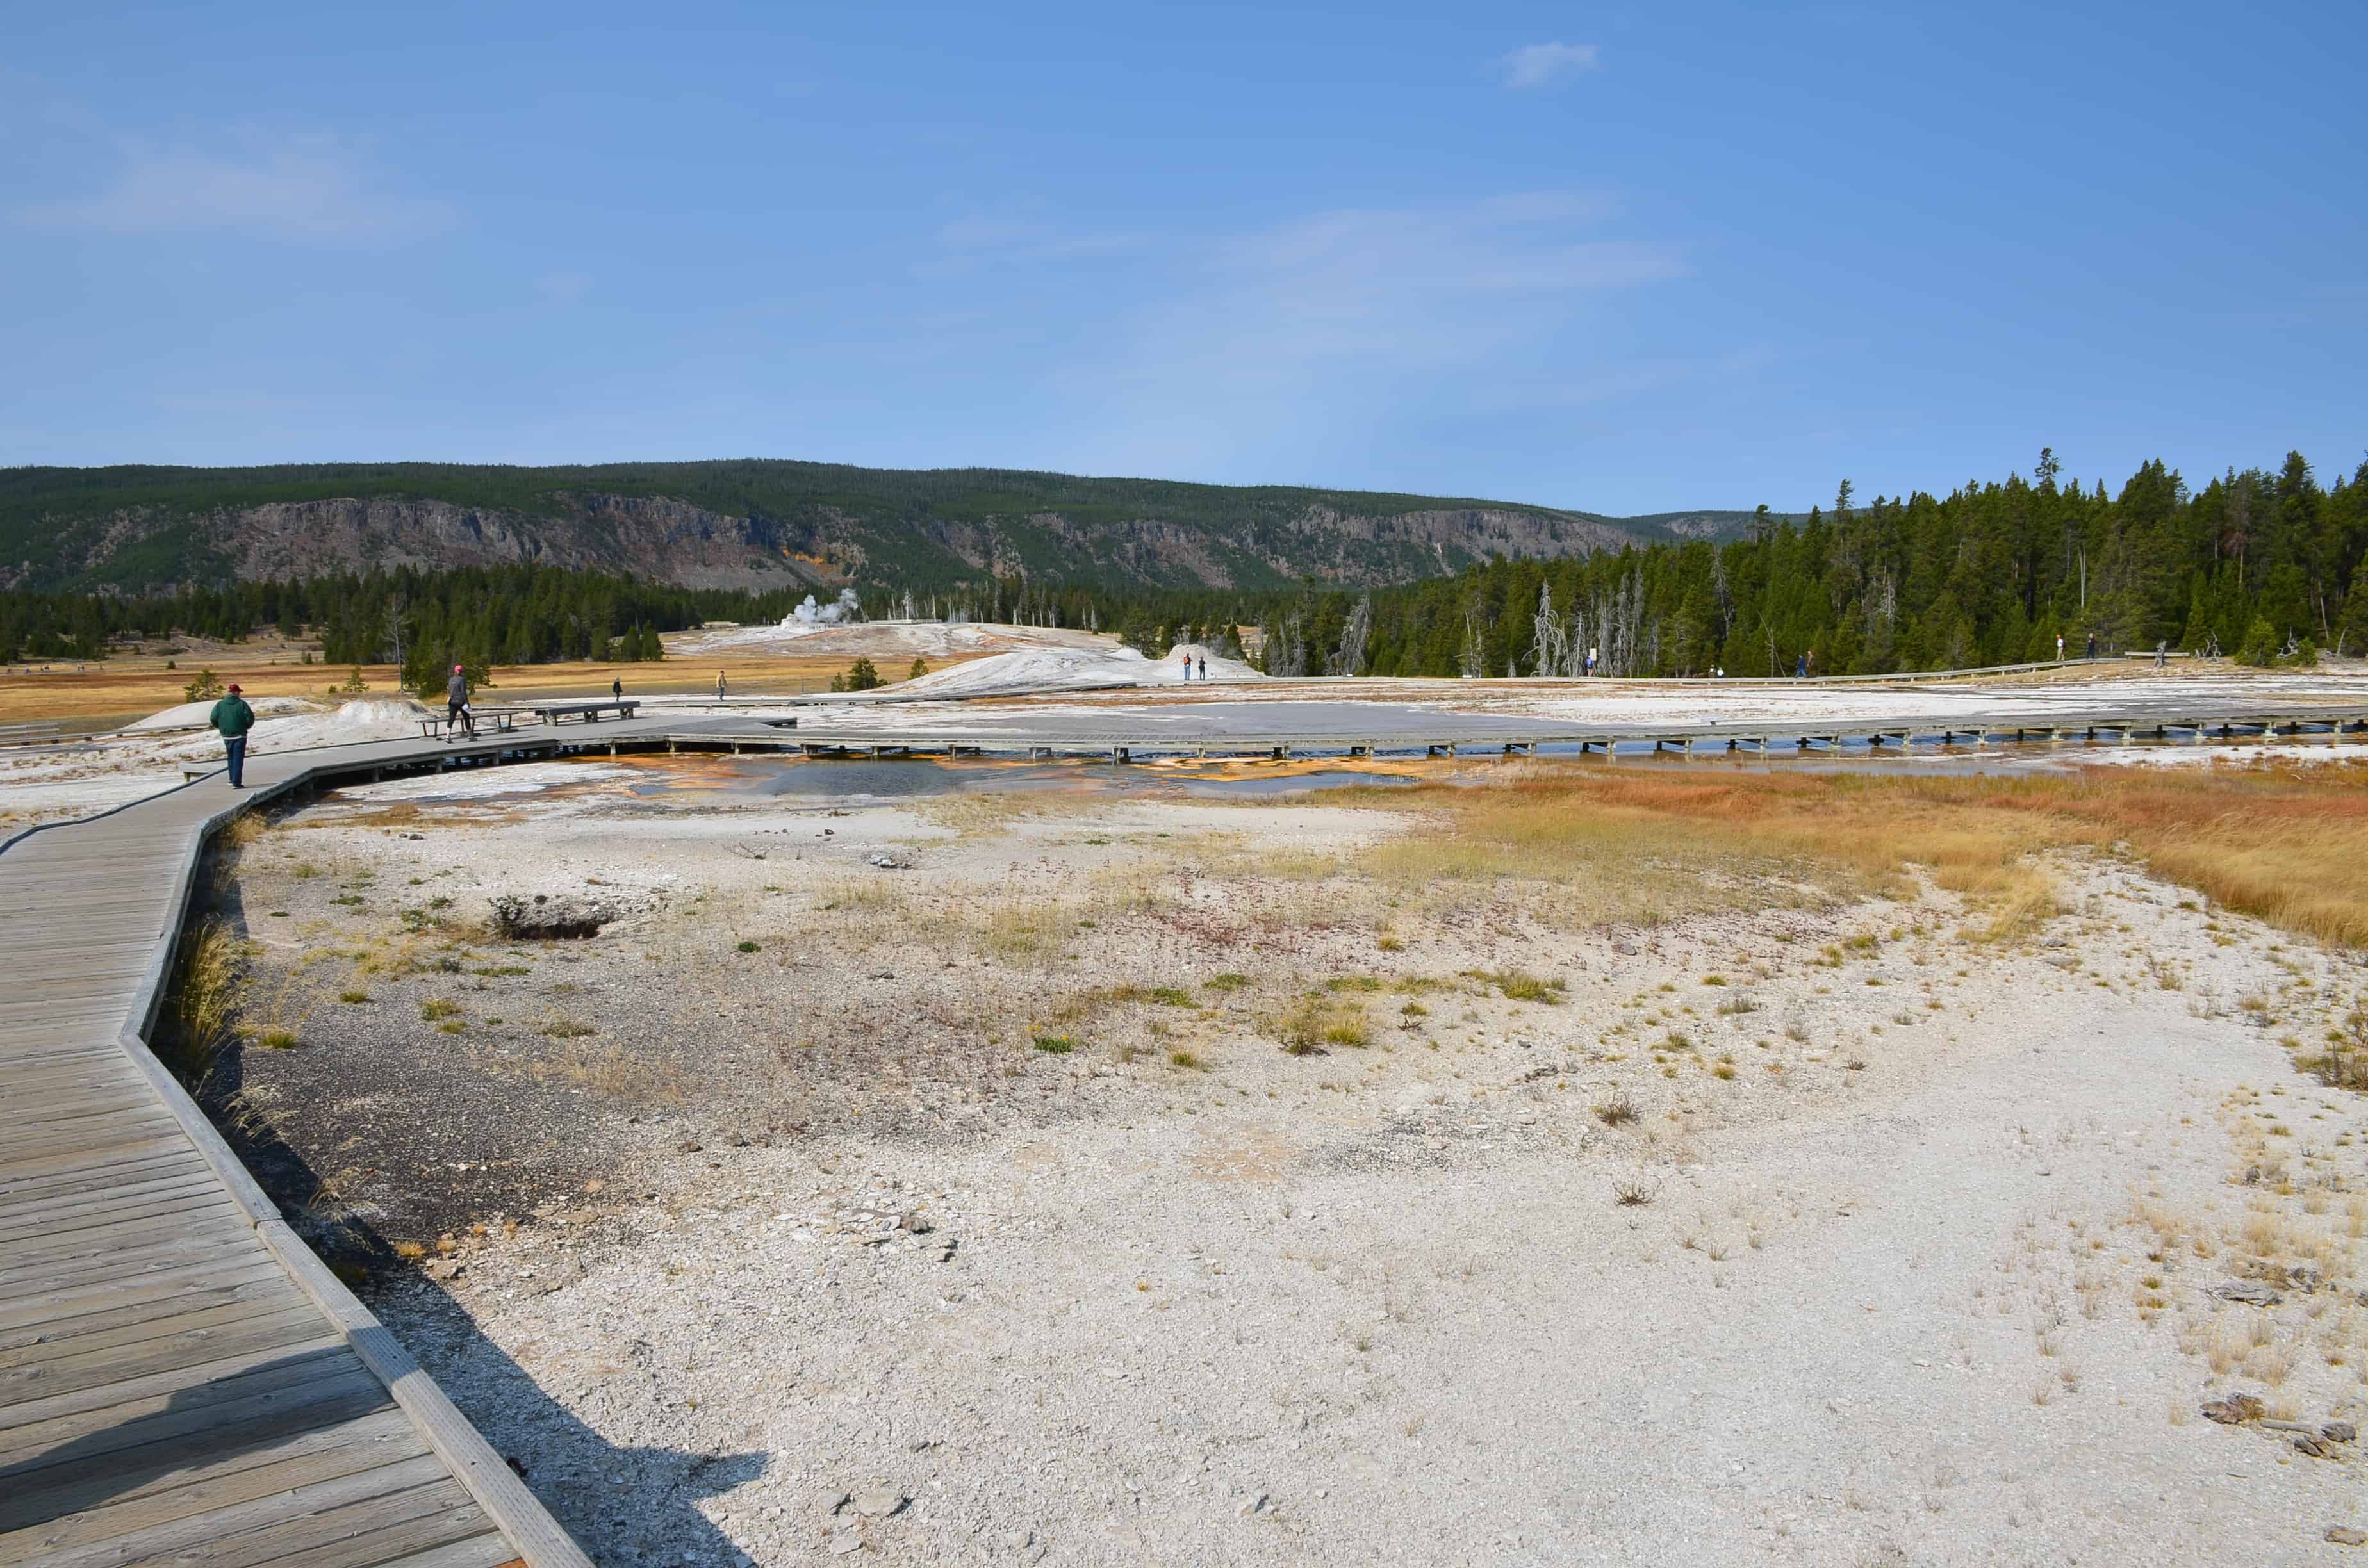 Geyser Hill at the Upper Geyser Basin in Yellowstone National Park, Wyoming